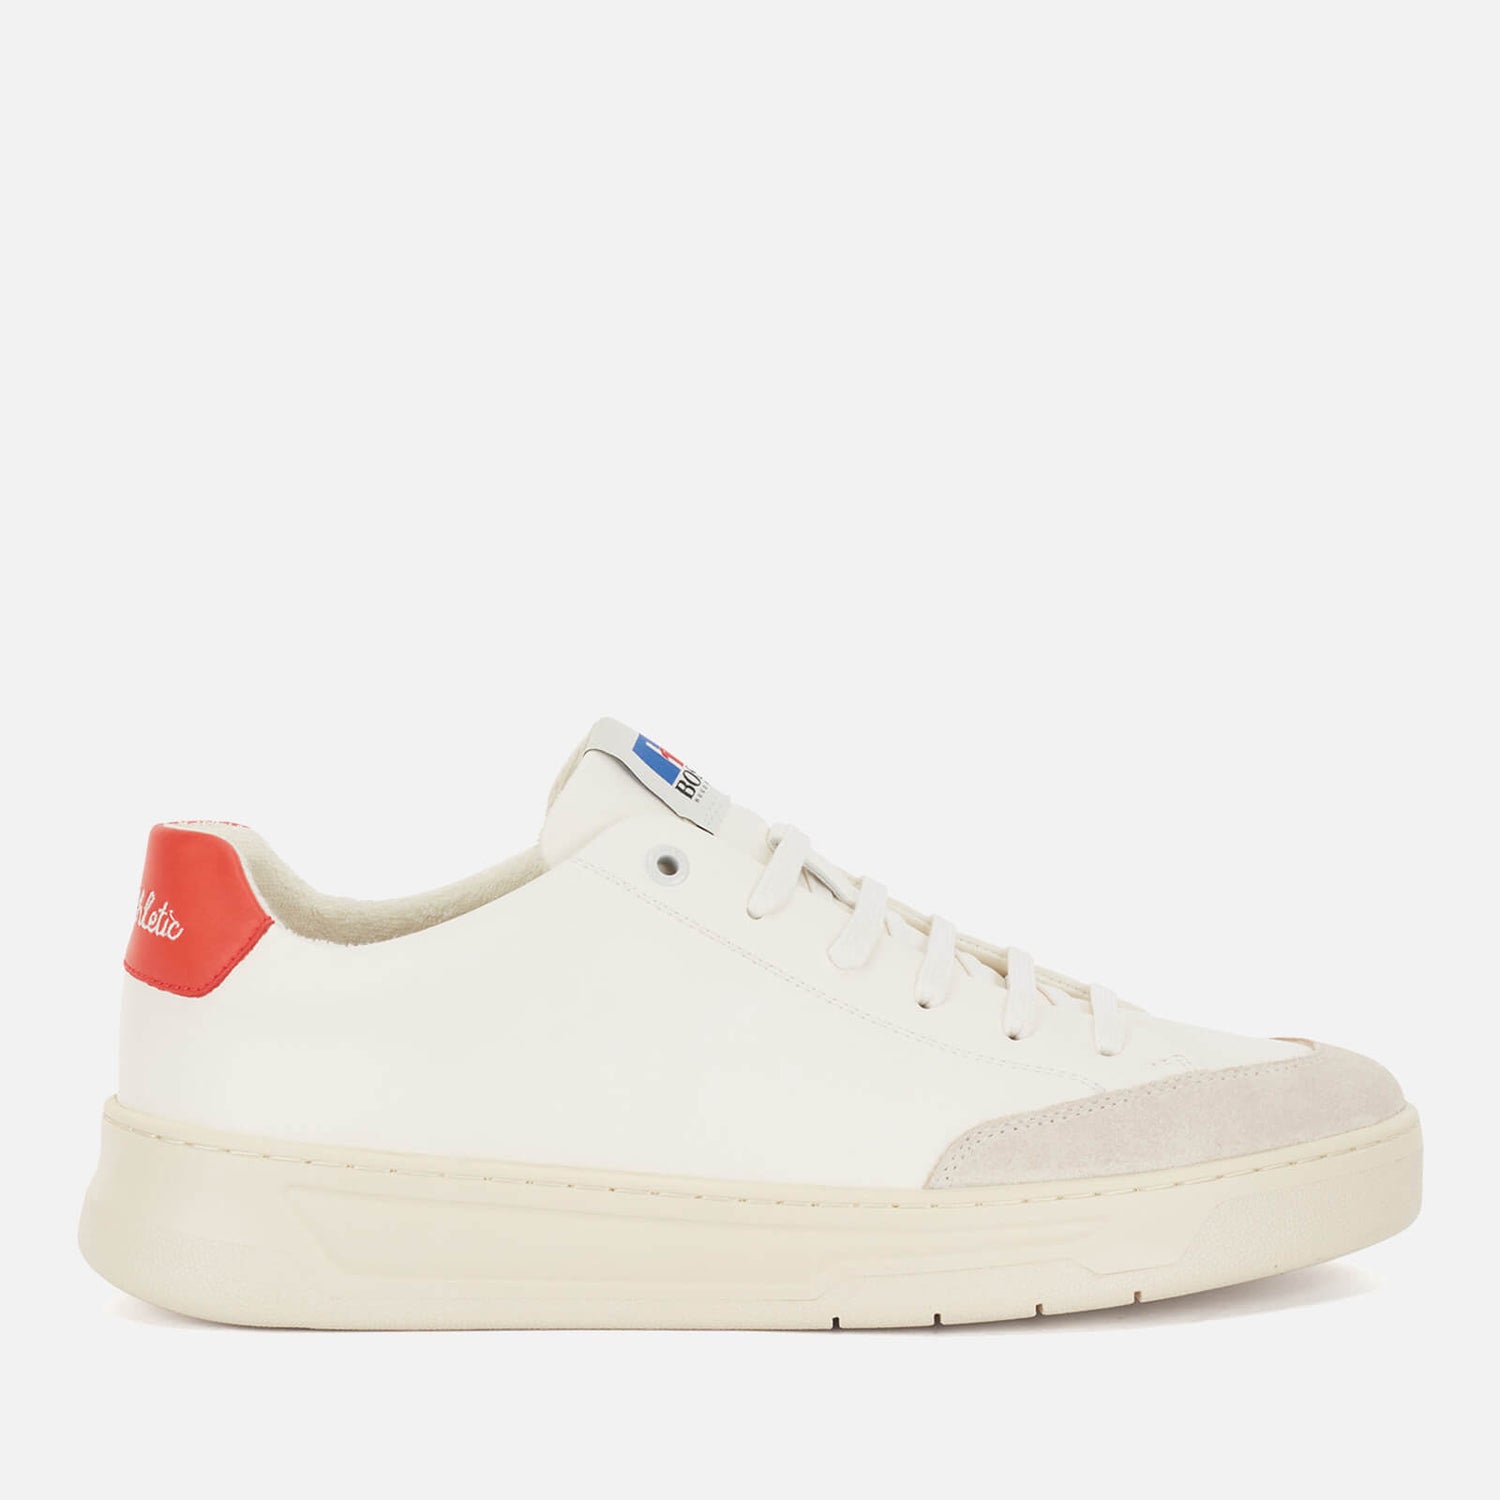 BOSS X Russell Athletic Men's Baltimore Tennis 01 Trainers - Open White - UK 9